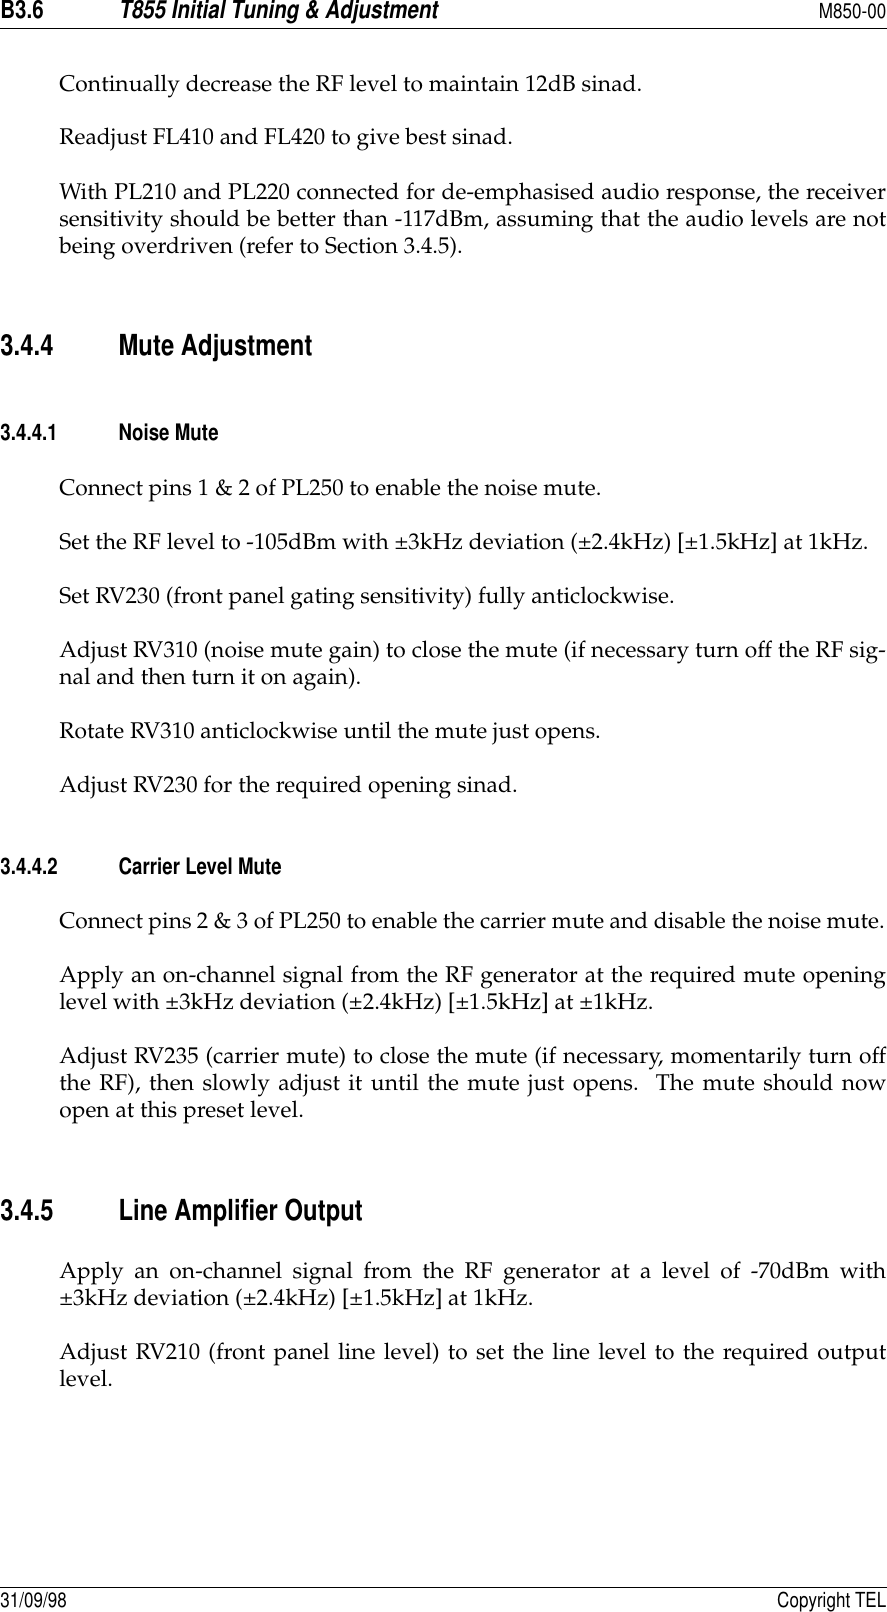 B3.6T855 Initial Tuning &amp; AdjustmentM850-0031/09/98 Copyright TELContinually decrease the RF level to maintain 12dB sinad.Readjust FL410 and FL420 to give best sinad.With PL210 and PL220 connected for de-emphasised audio response, the receiversensitivity should be better than -117dBm, assuming that the audio levels are notbeing overdriven (refer to Section 3.4.5).3.4.4 Mute Adjustment3.4.4.1 Noise MuteConnect pins 1 &amp; 2 of PL250 to enable the noise mute.Set the RF level to -105dBm with ±3kHz deviation (±2.4kHz) [±1.5kHz] at 1kHz.Set RV230 (front panel gating sensitivity) fully anticlockwise.Adjust RV310 (noise mute gain) to close the mute (if necessary turn off the RF sig-nal and then turn it on again).Rotate RV310 anticlockwise until the mute just opens.Adjust RV230 for the required opening sinad.3.4.4.2 Carrier Level MuteConnect pins 2 &amp; 3 of PL250 to enable the carrier mute and disable the noise mute.Apply an on-channel signal from the RF generator at the required mute openinglevel with ±3kHz deviation (±2.4kHz) [±1.5kHz] at ±1kHz.Adjust RV235 (carrier mute) to close the mute (if necessary, momentarily turn offthe RF), then slowly adjust it until the mute just opens.  The mute should nowopen at this preset level.3.4.5 Line Amplifier OutputApply an on-channel signal from the RF generator at a level of -70dBm with±3kHz deviation (±2.4kHz) [±1.5kHz] at 1kHz.Adjust RV210 (front panel line level) to set the line level to the required outputlevel.